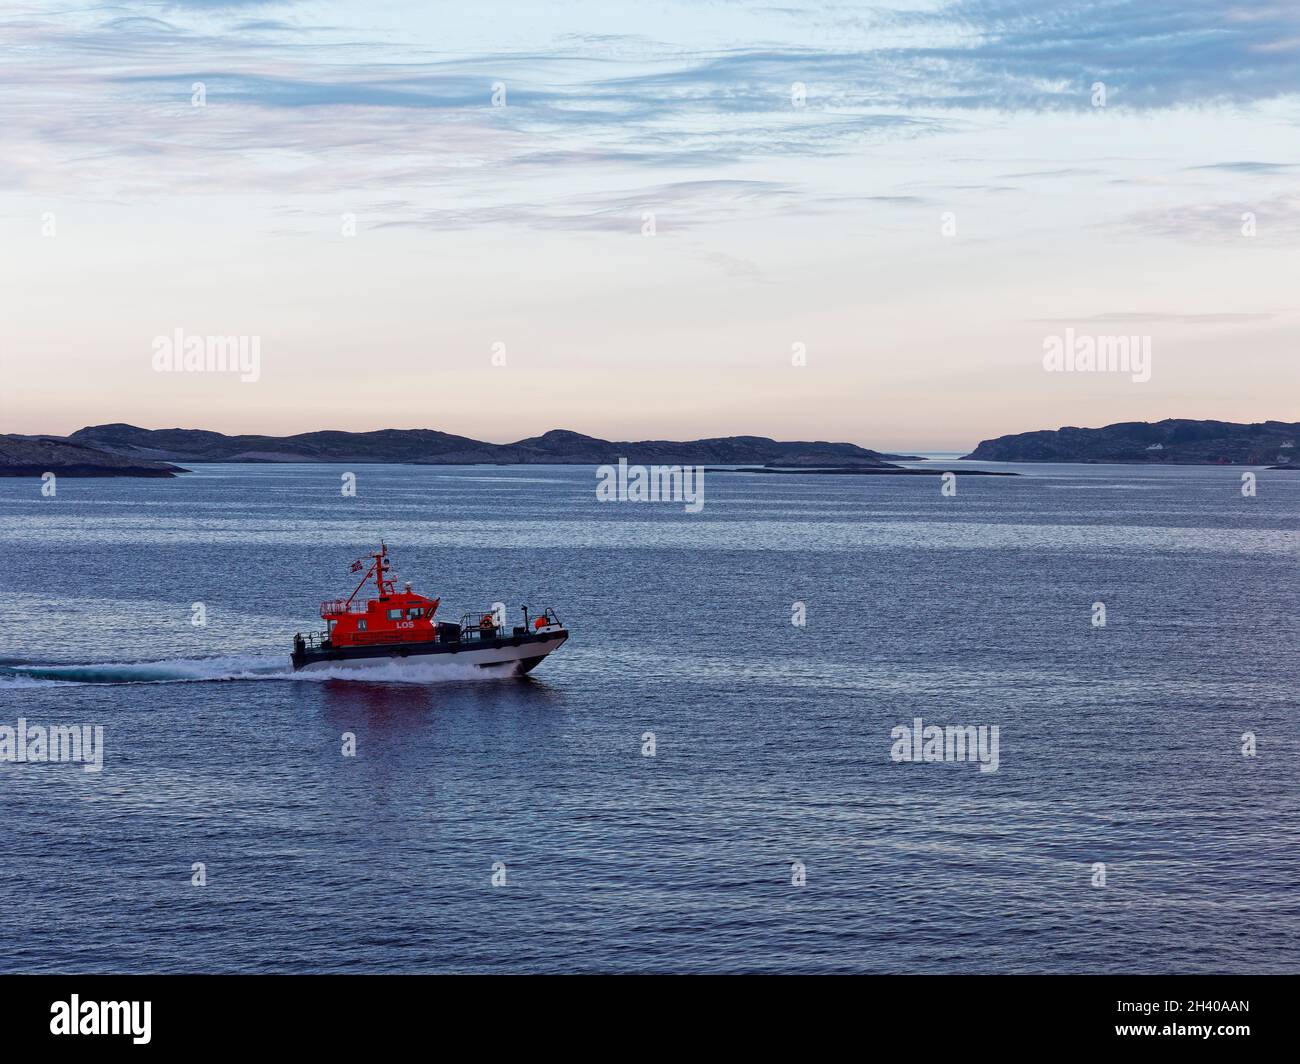 The Bergen Pilot Boat escorting a Vessel through the Fjord between the many small Islands that can be seen on the Norwegian Coastline. Stock Photo